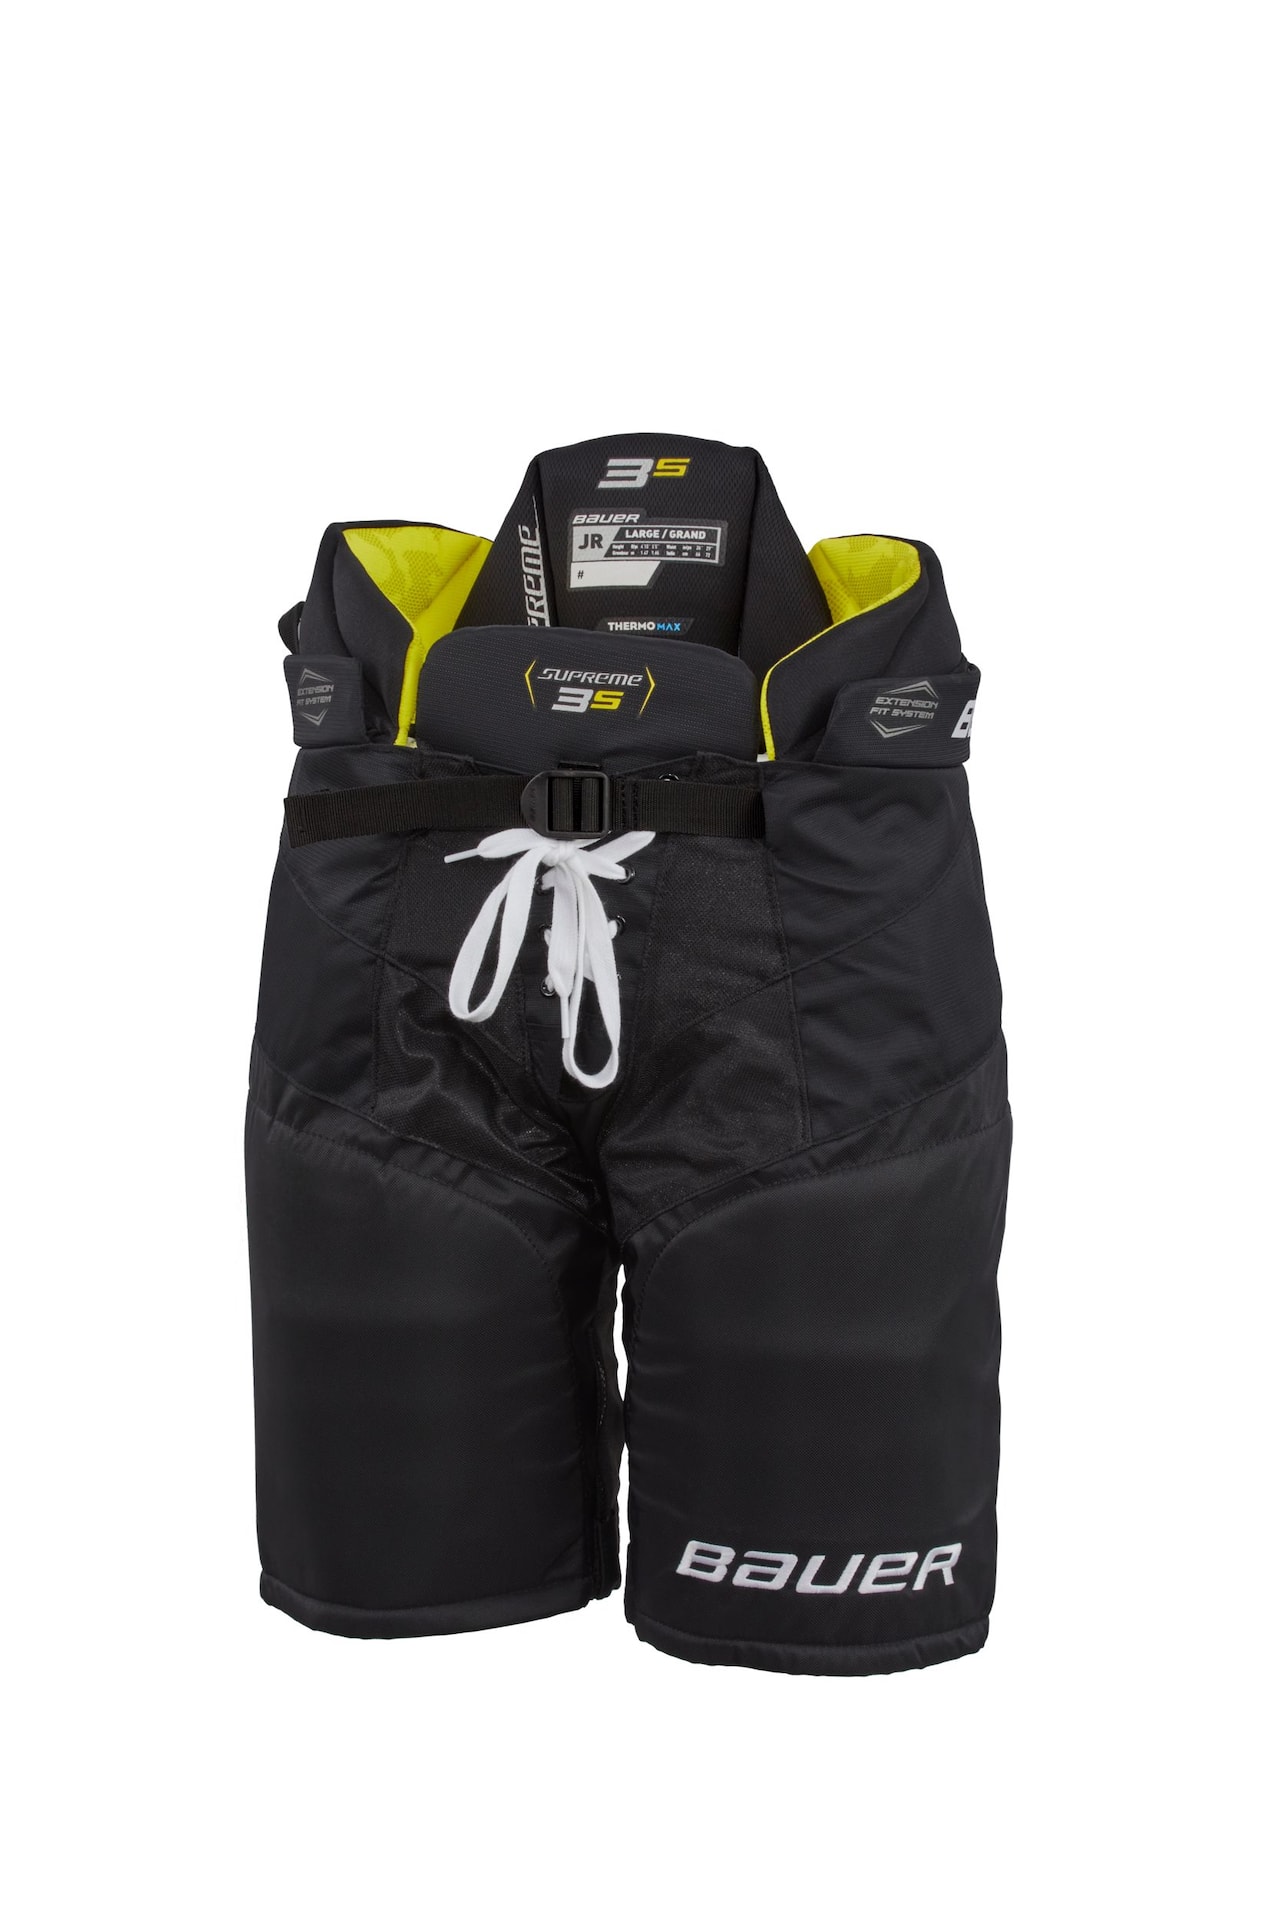 https://media-www.canadiantire.ca/product/playing/hockey/hockey-equipment/4833993/bauer-3s-hockey-pants-junior-large-black-075bb037-22c7-468d-a13c-e6e40a24a88e-jpgrendition.jpg